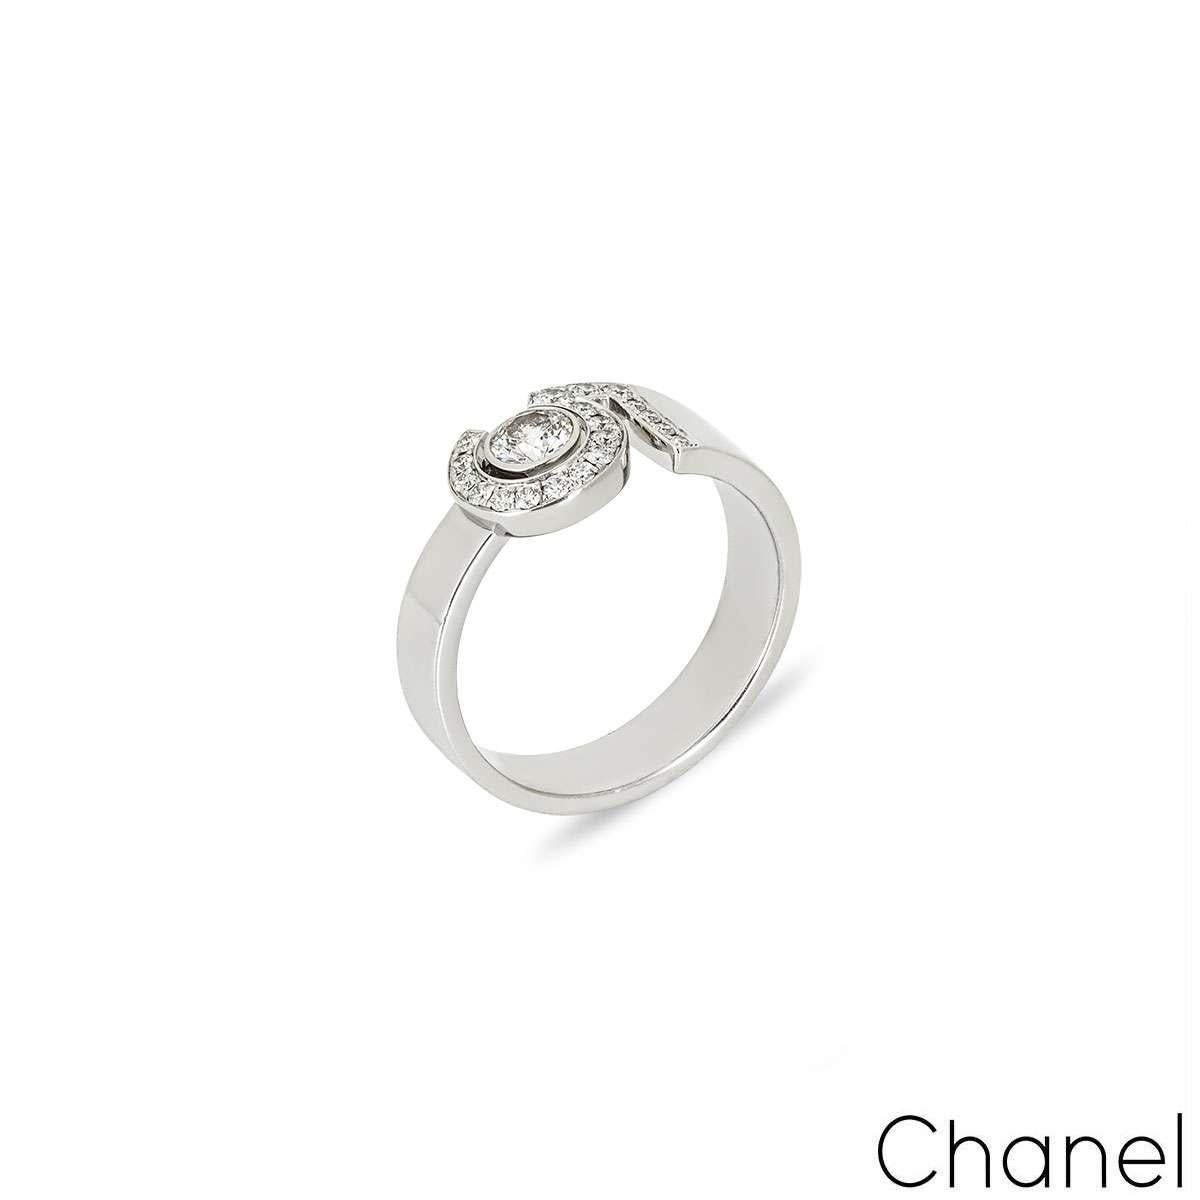 An 18k white gold diamond ring, by Chanel from their iconic No.5 collection. The ring comprises of a single round brilliant cut diamond (0.25ct) set in the centre which is surrounded by the number 5. The 5 is also diamond set, with a total of 19